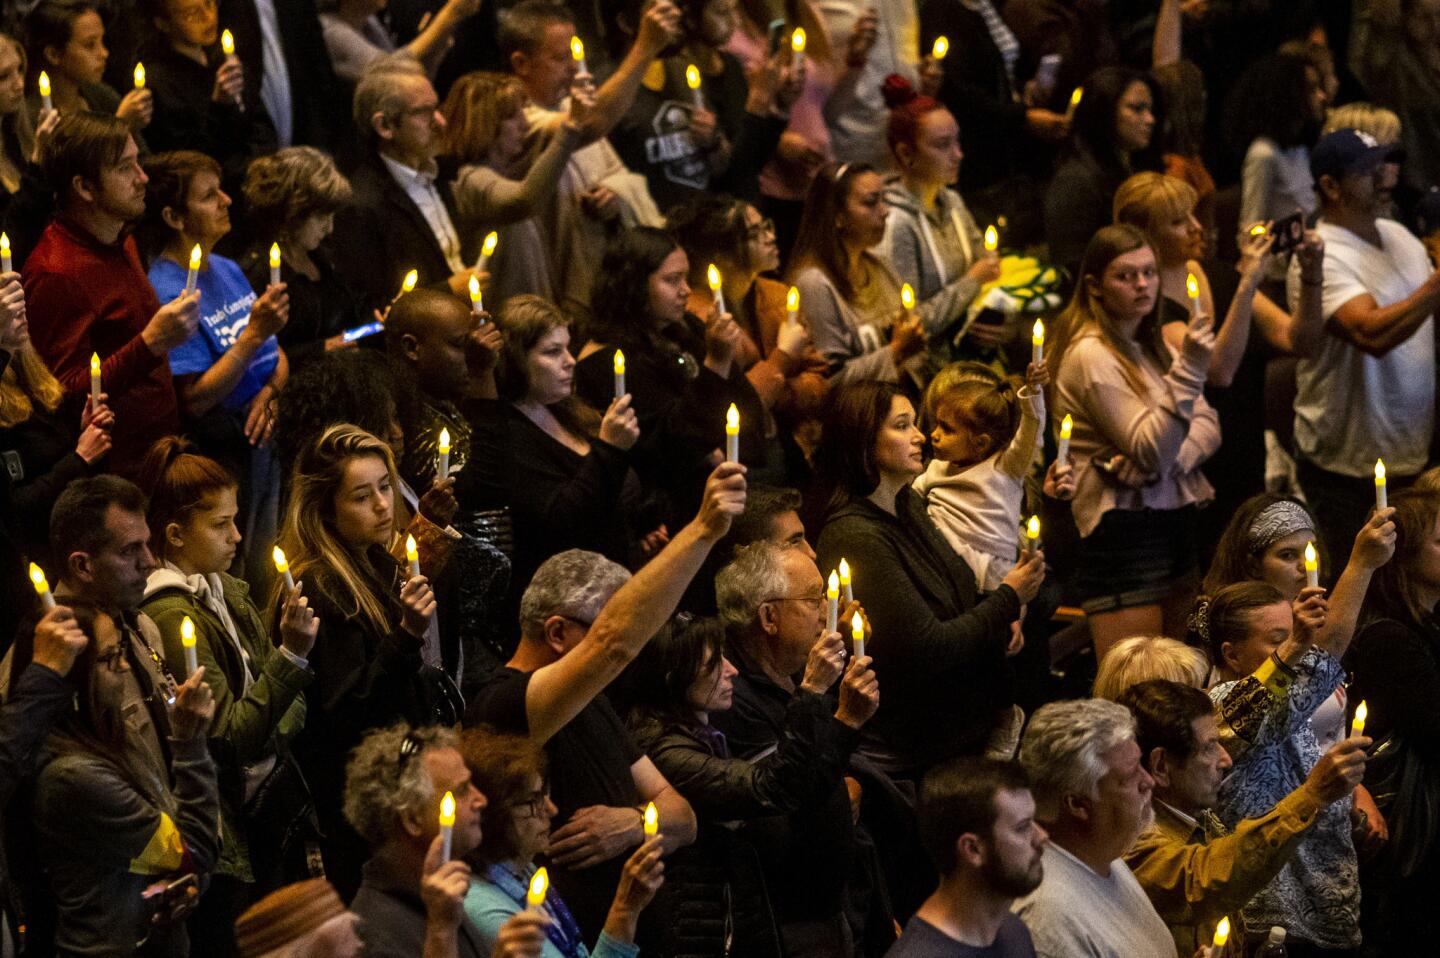 People in the Fred Kavli Theater raise battery-powered candles at a vigil for victims of the Borderline Bar and Grill shooting.